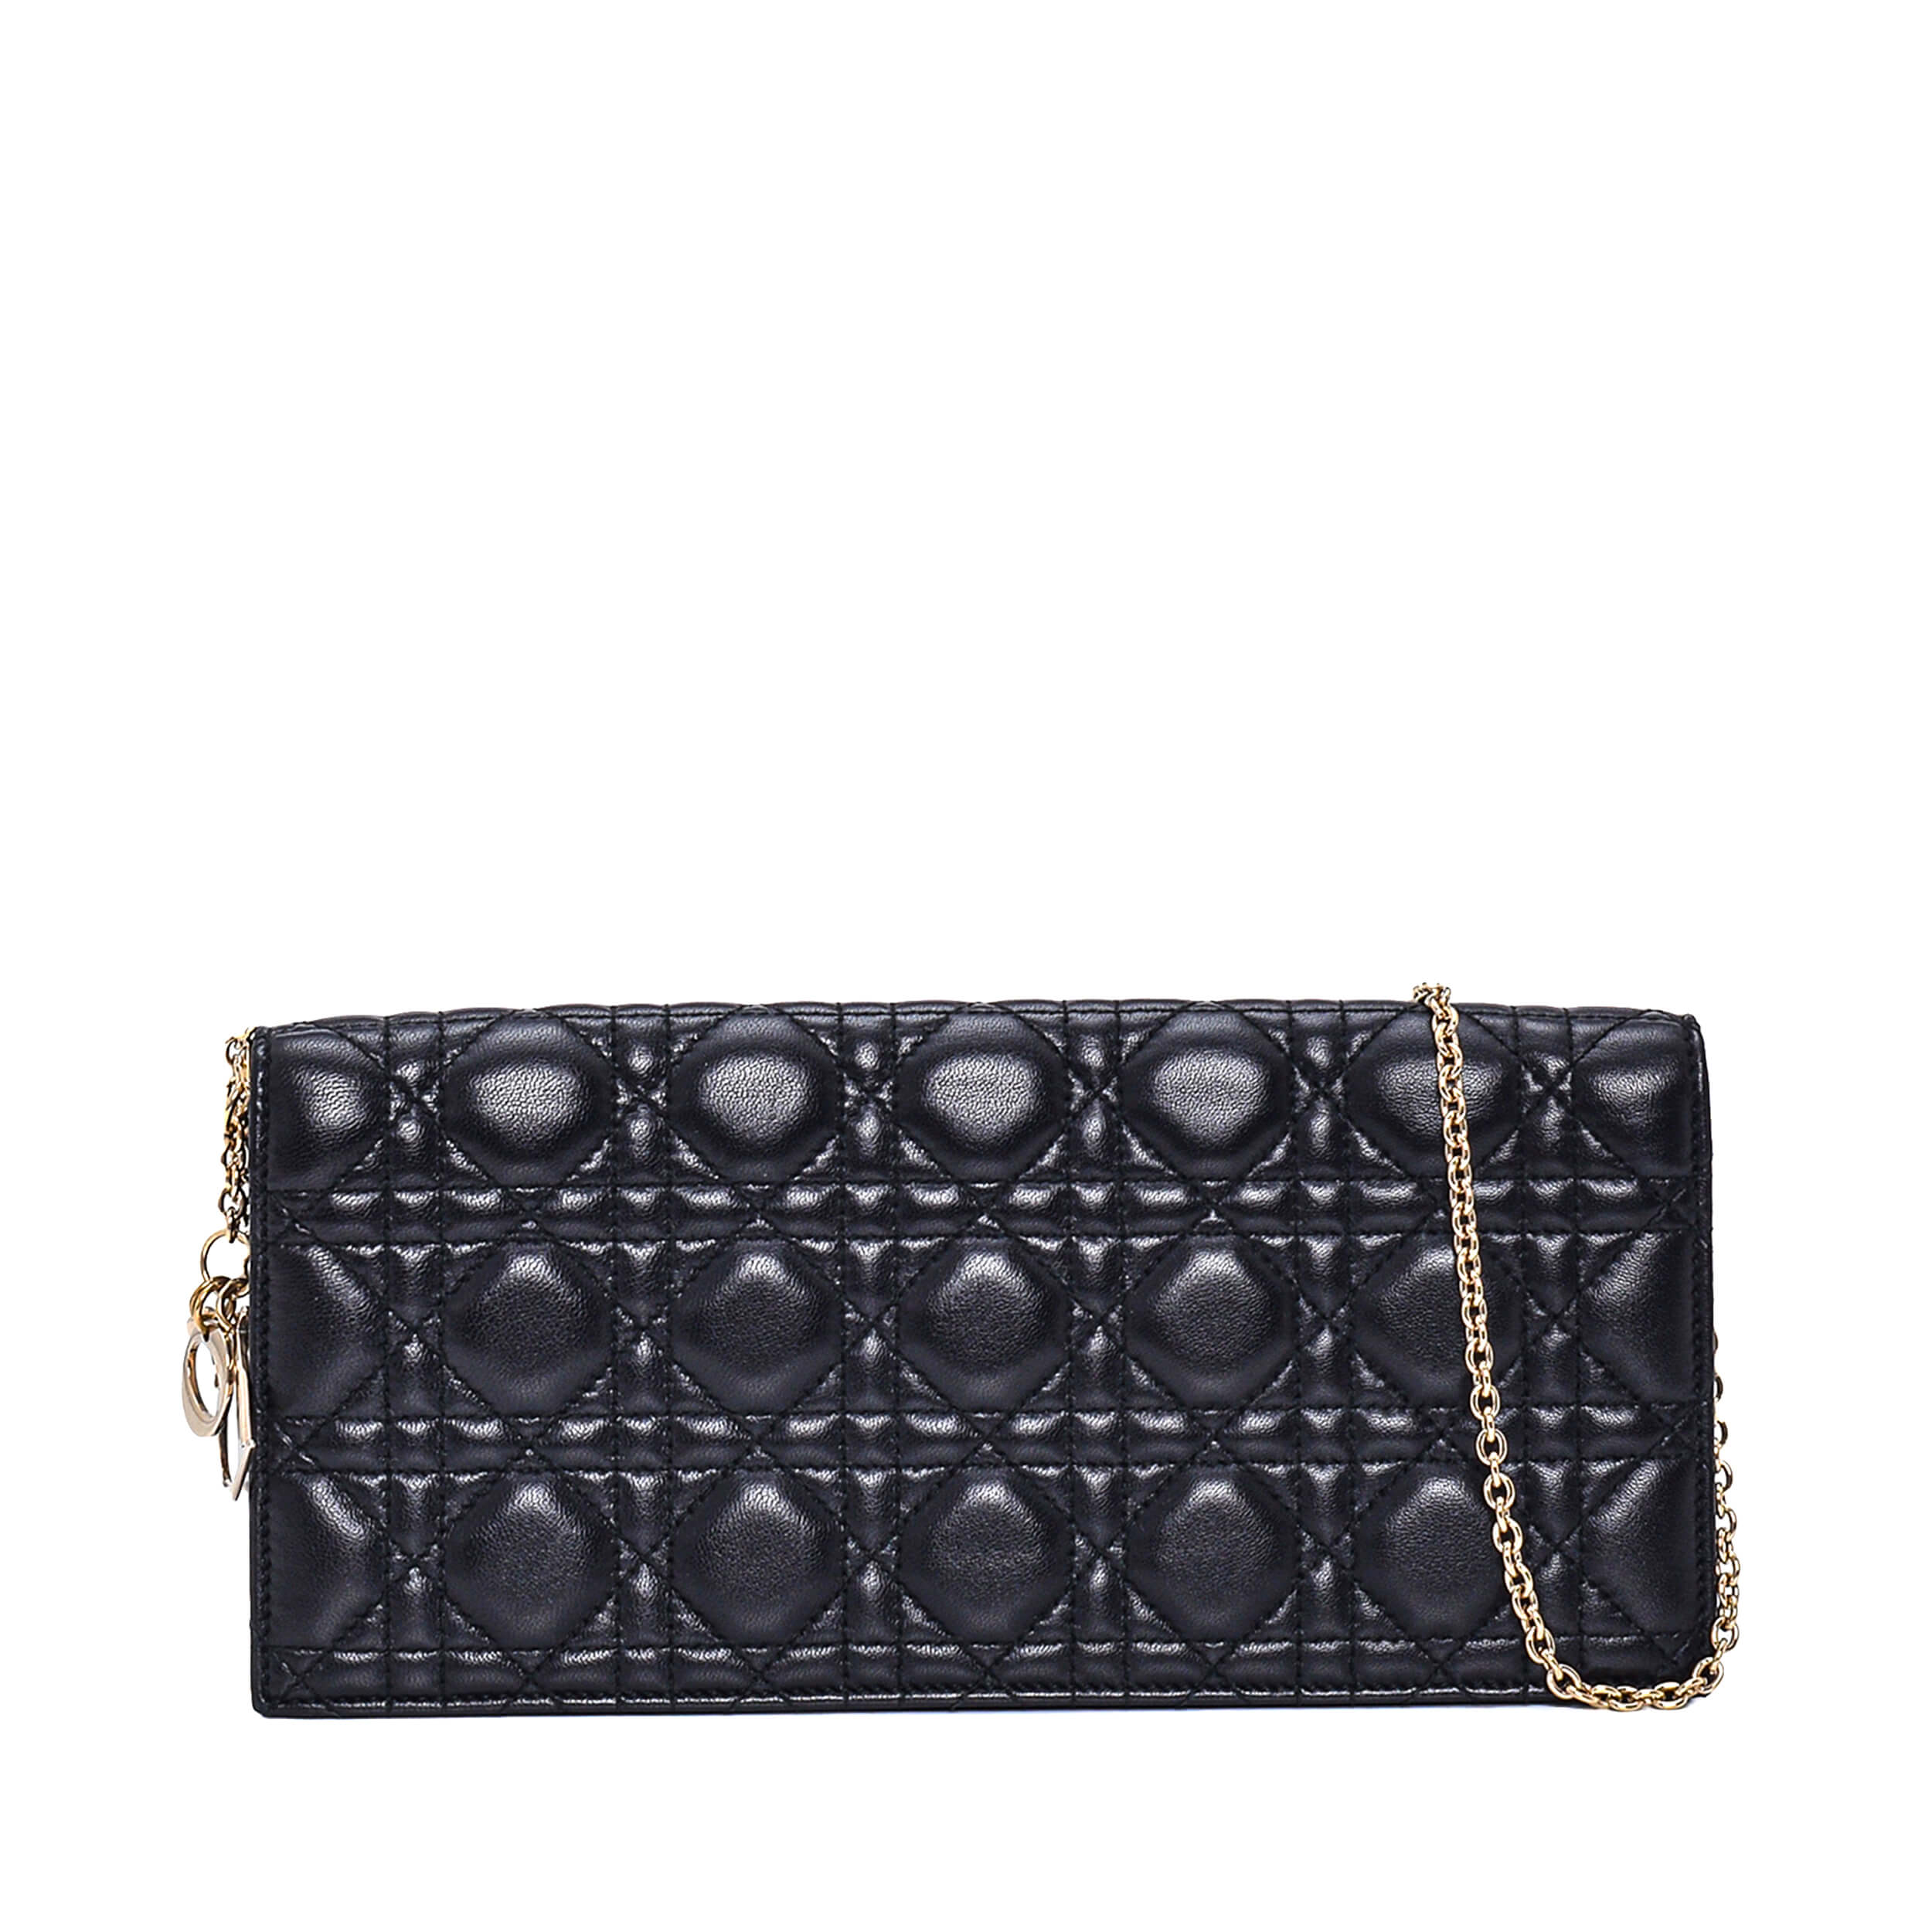 Christian Dior - Black Leather Long Wallet On Chain